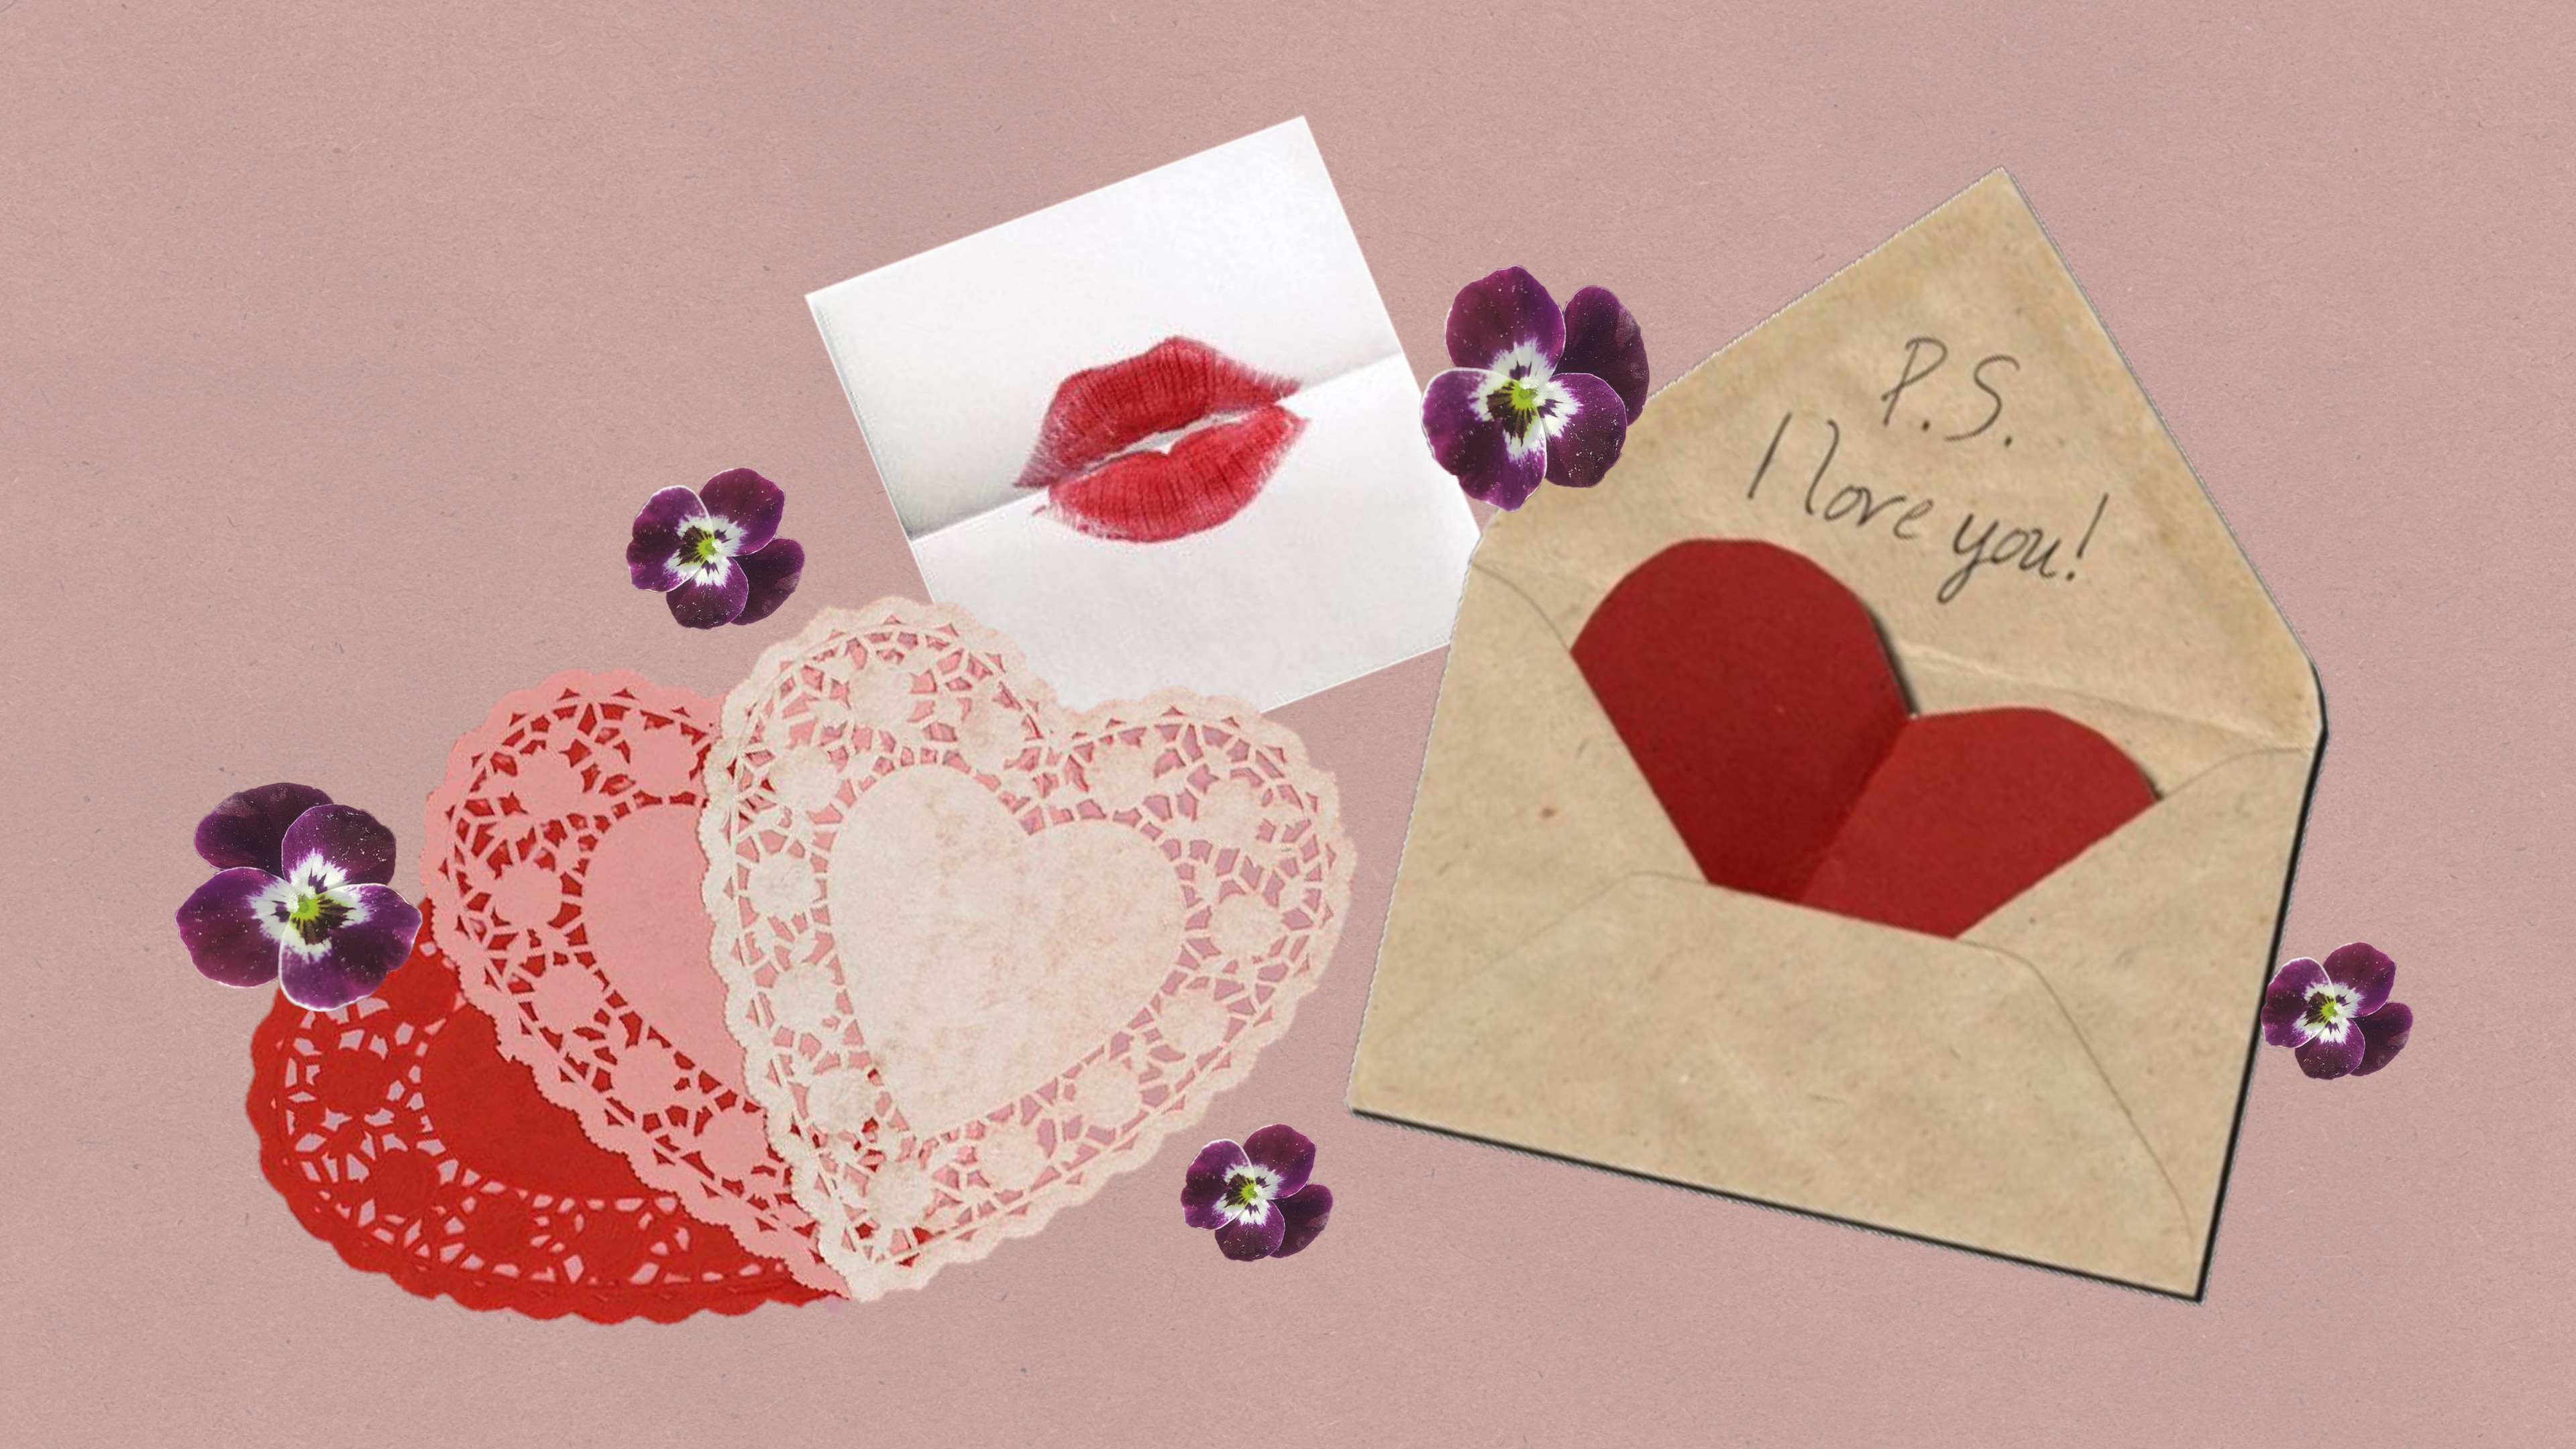 Love letters and hearts laid against a mauve background.